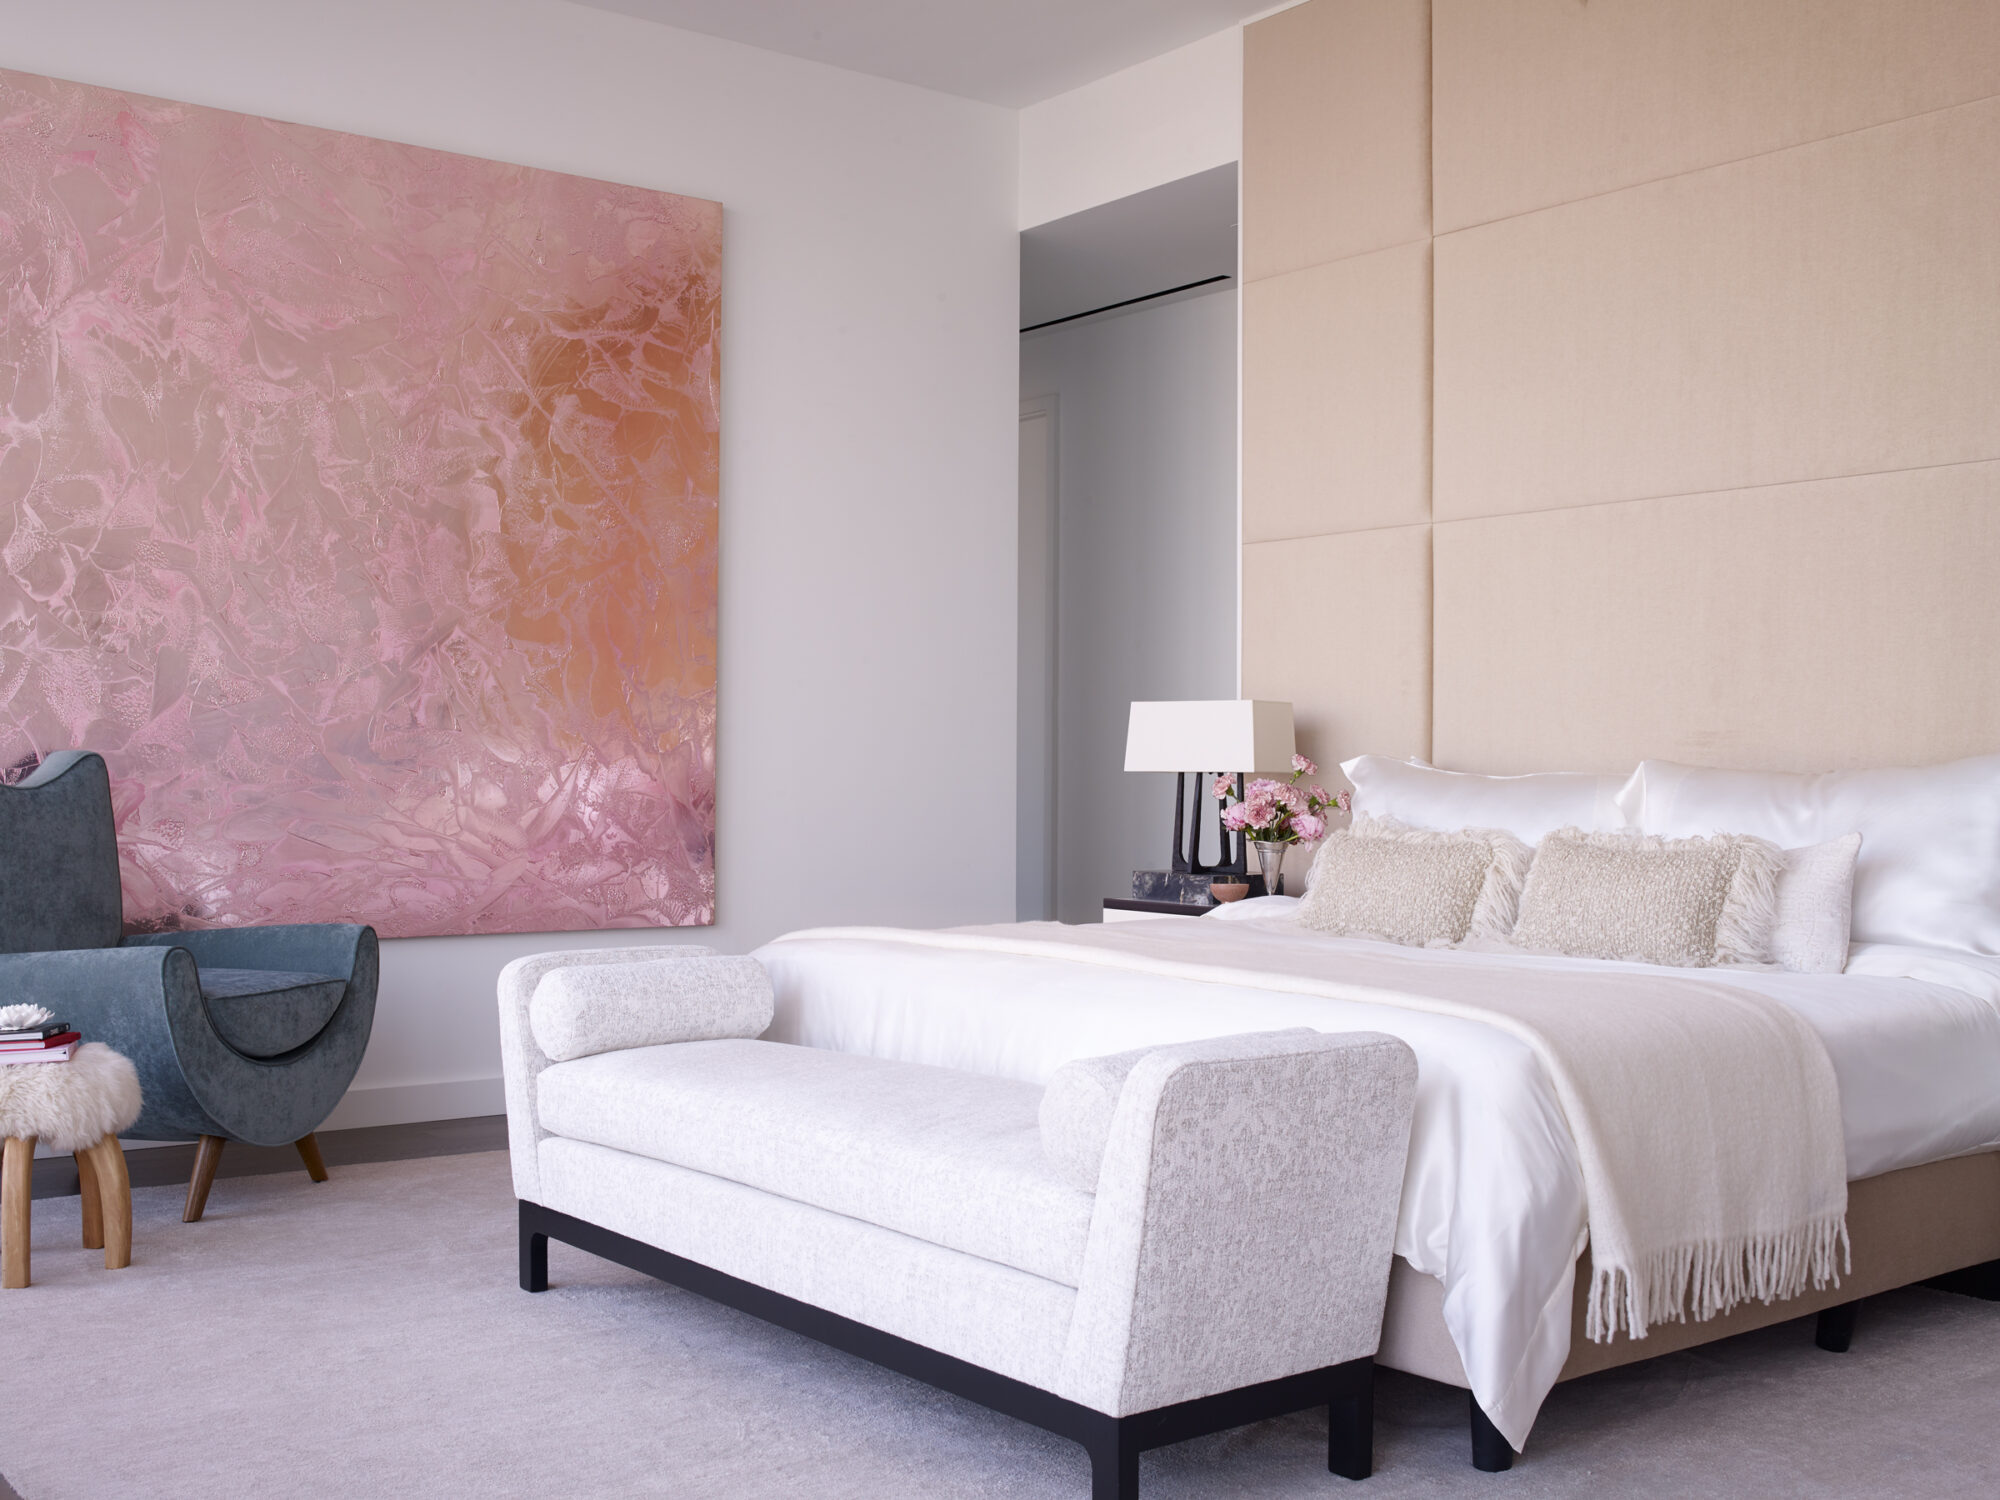 Different shades of pink define this spacious bedroom